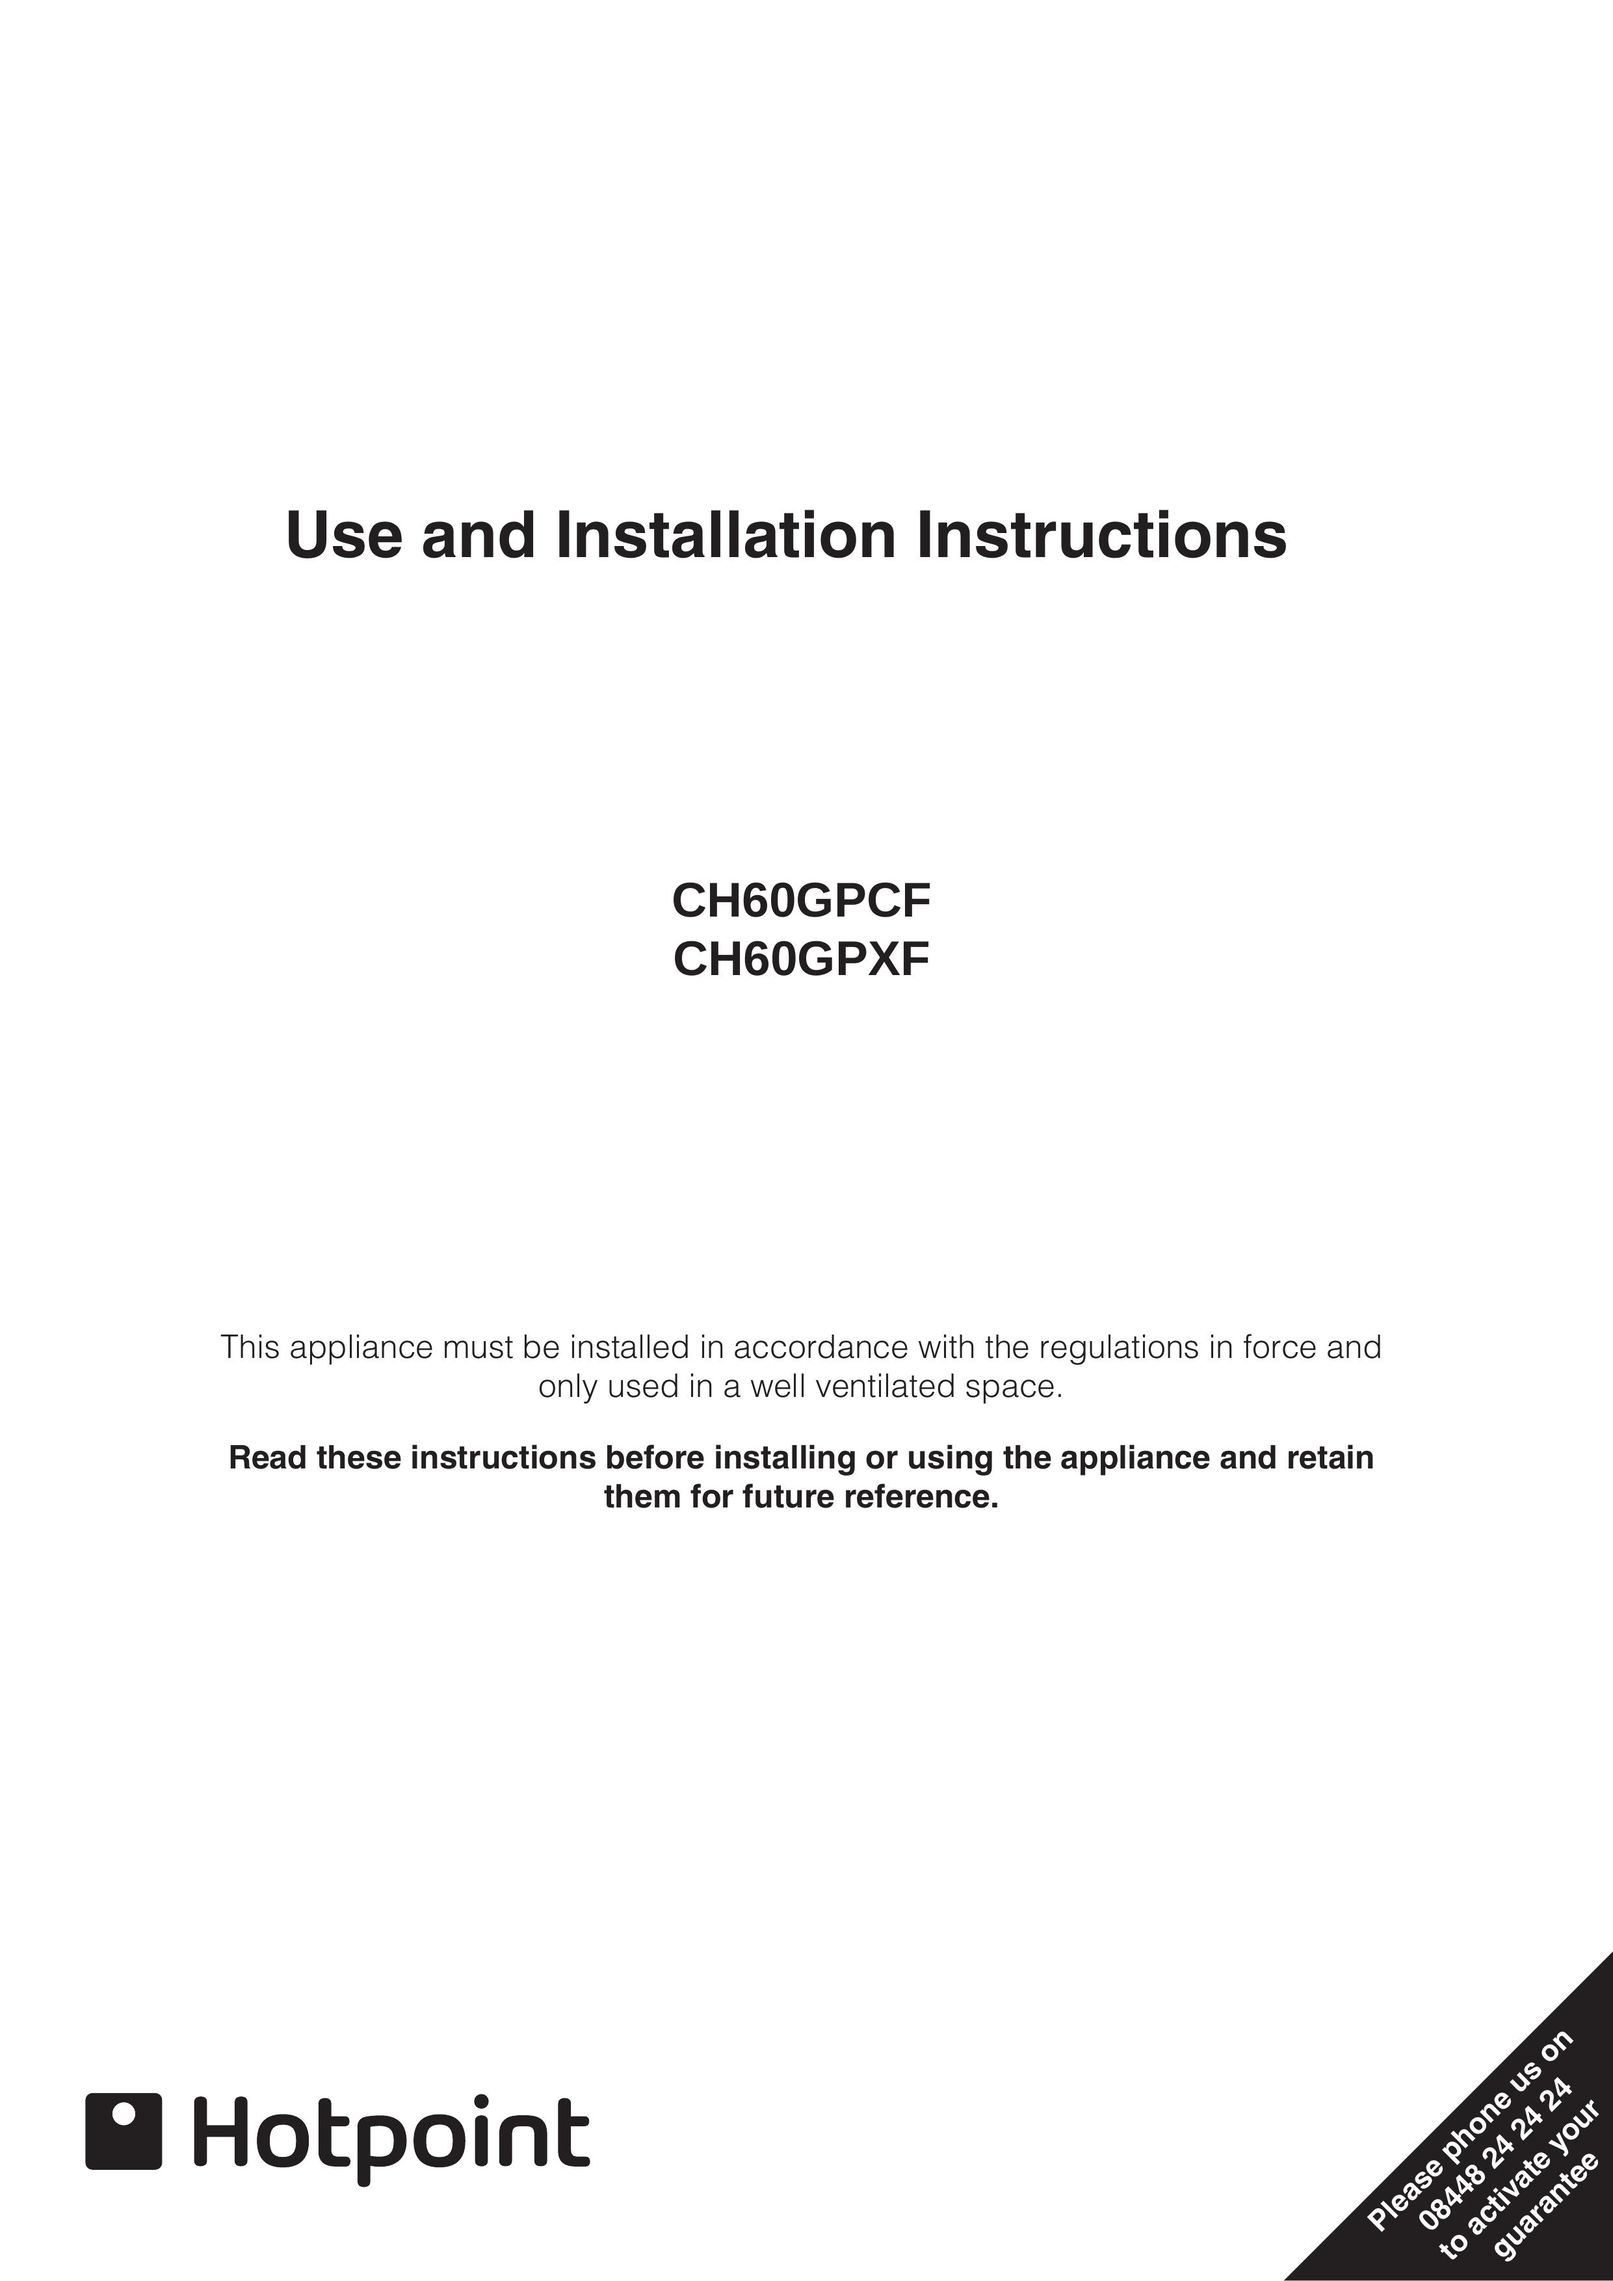 Hotpoint ch60gpcf Double Oven User Manual